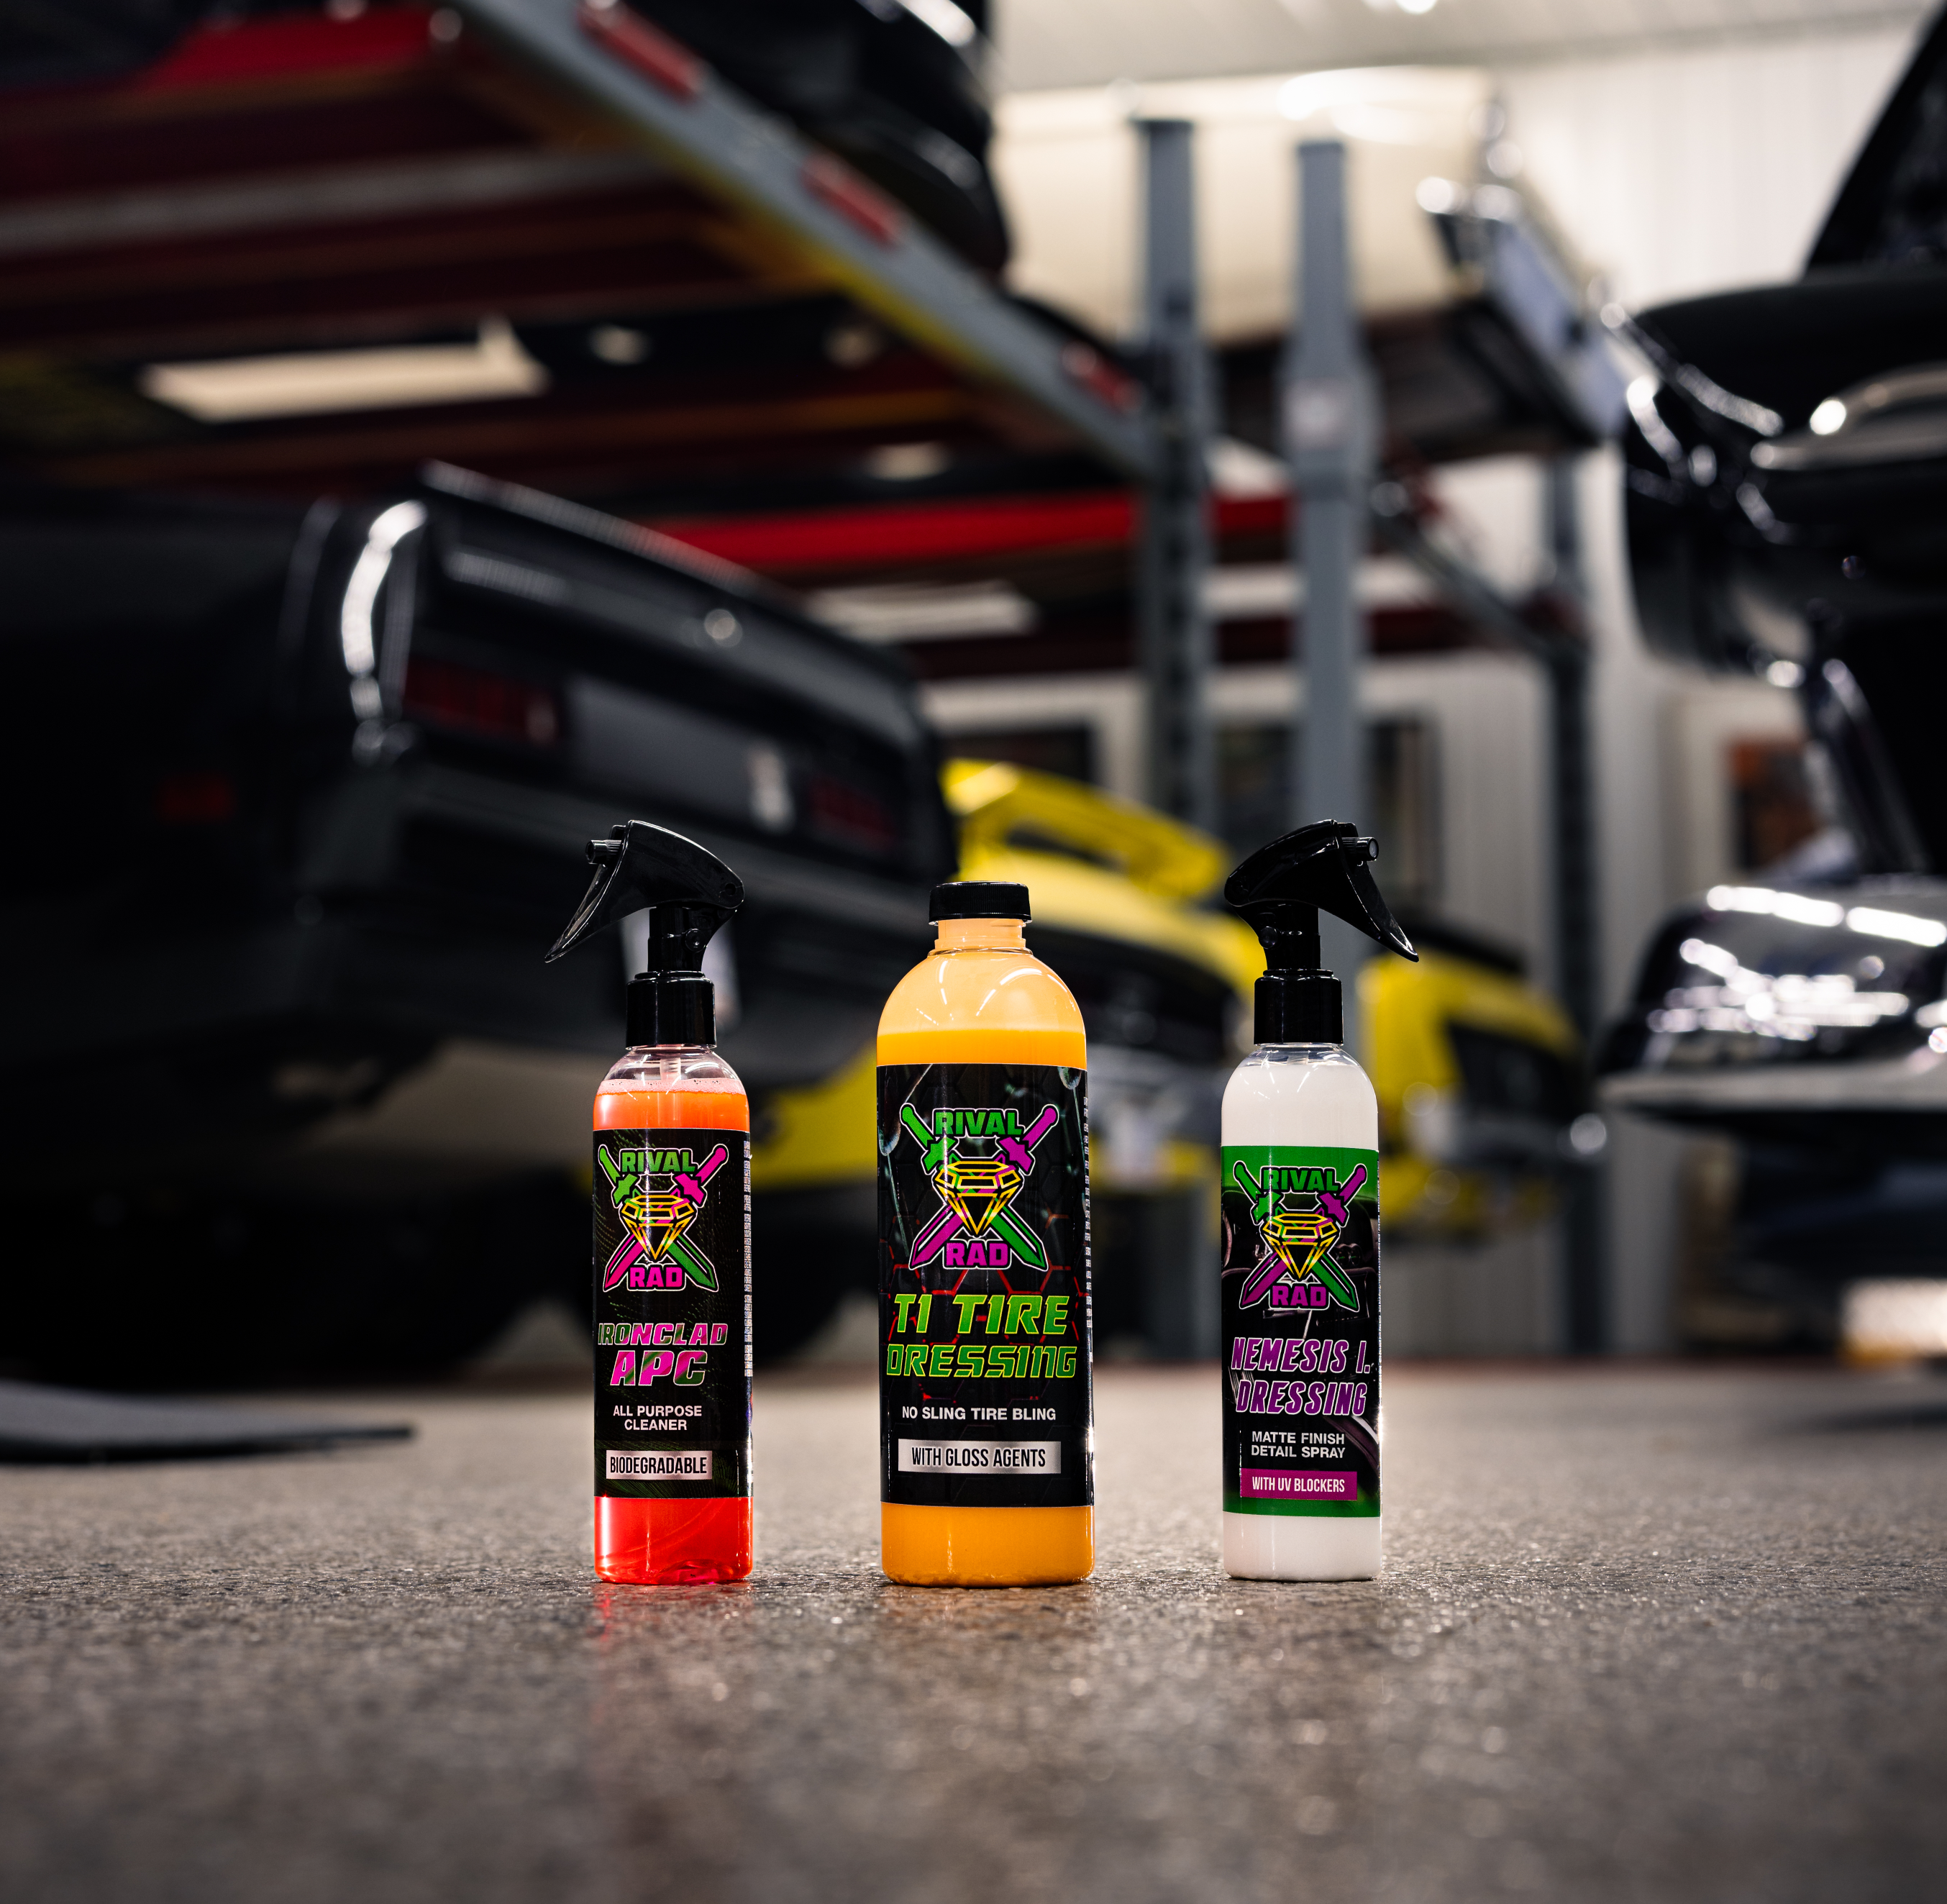 High quality car care products Rival Rad ensures the best shine and protection on the market